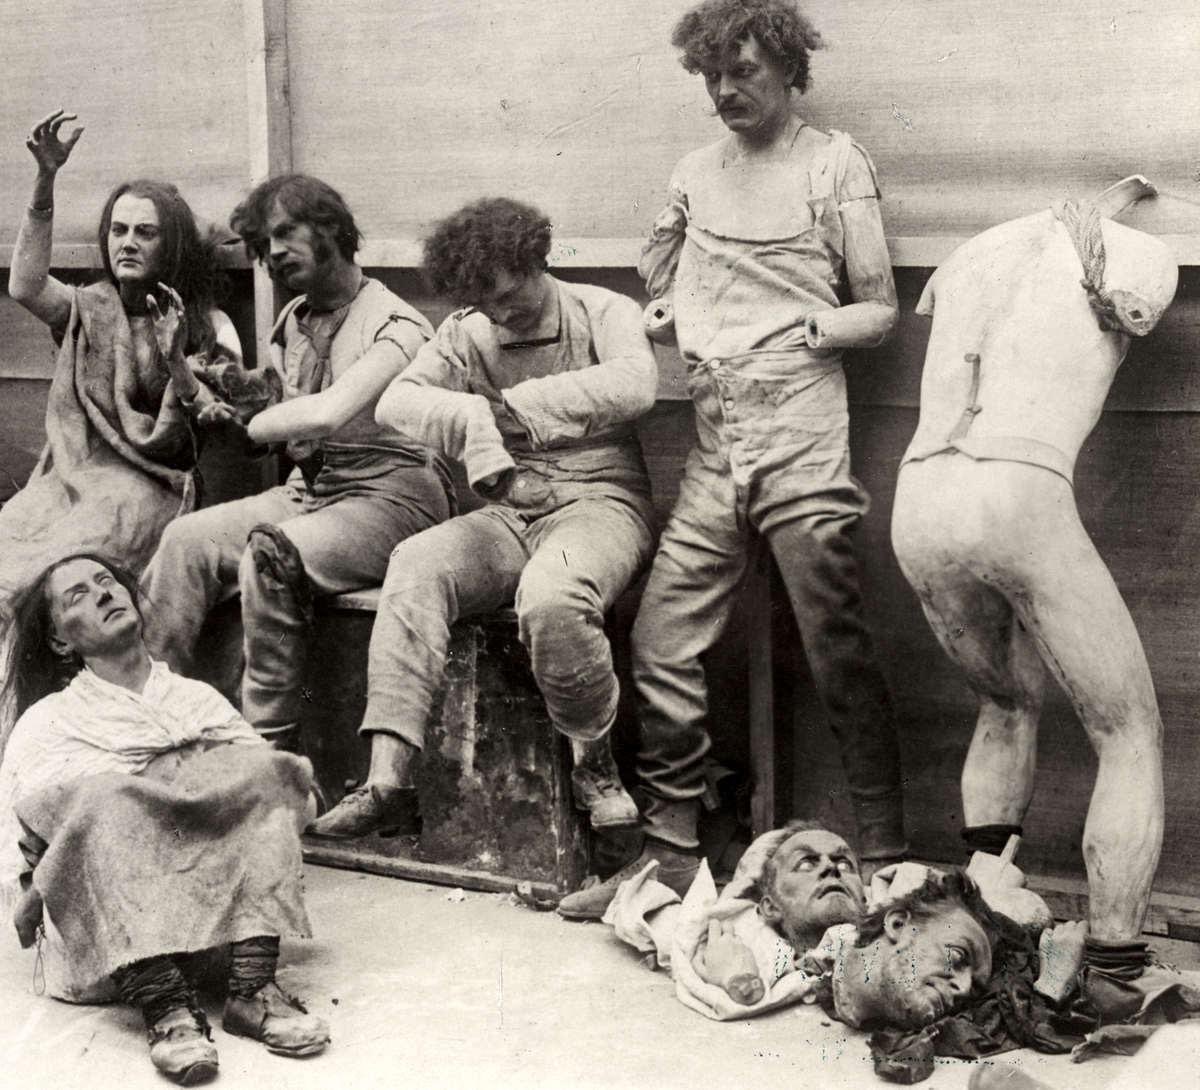 RT @Ttalindeyzac: Melted and damaged mannequins after a fire at Madam Tussaud's Wax Museum in London, 1930 https://t.co/wPoi6Luy1U